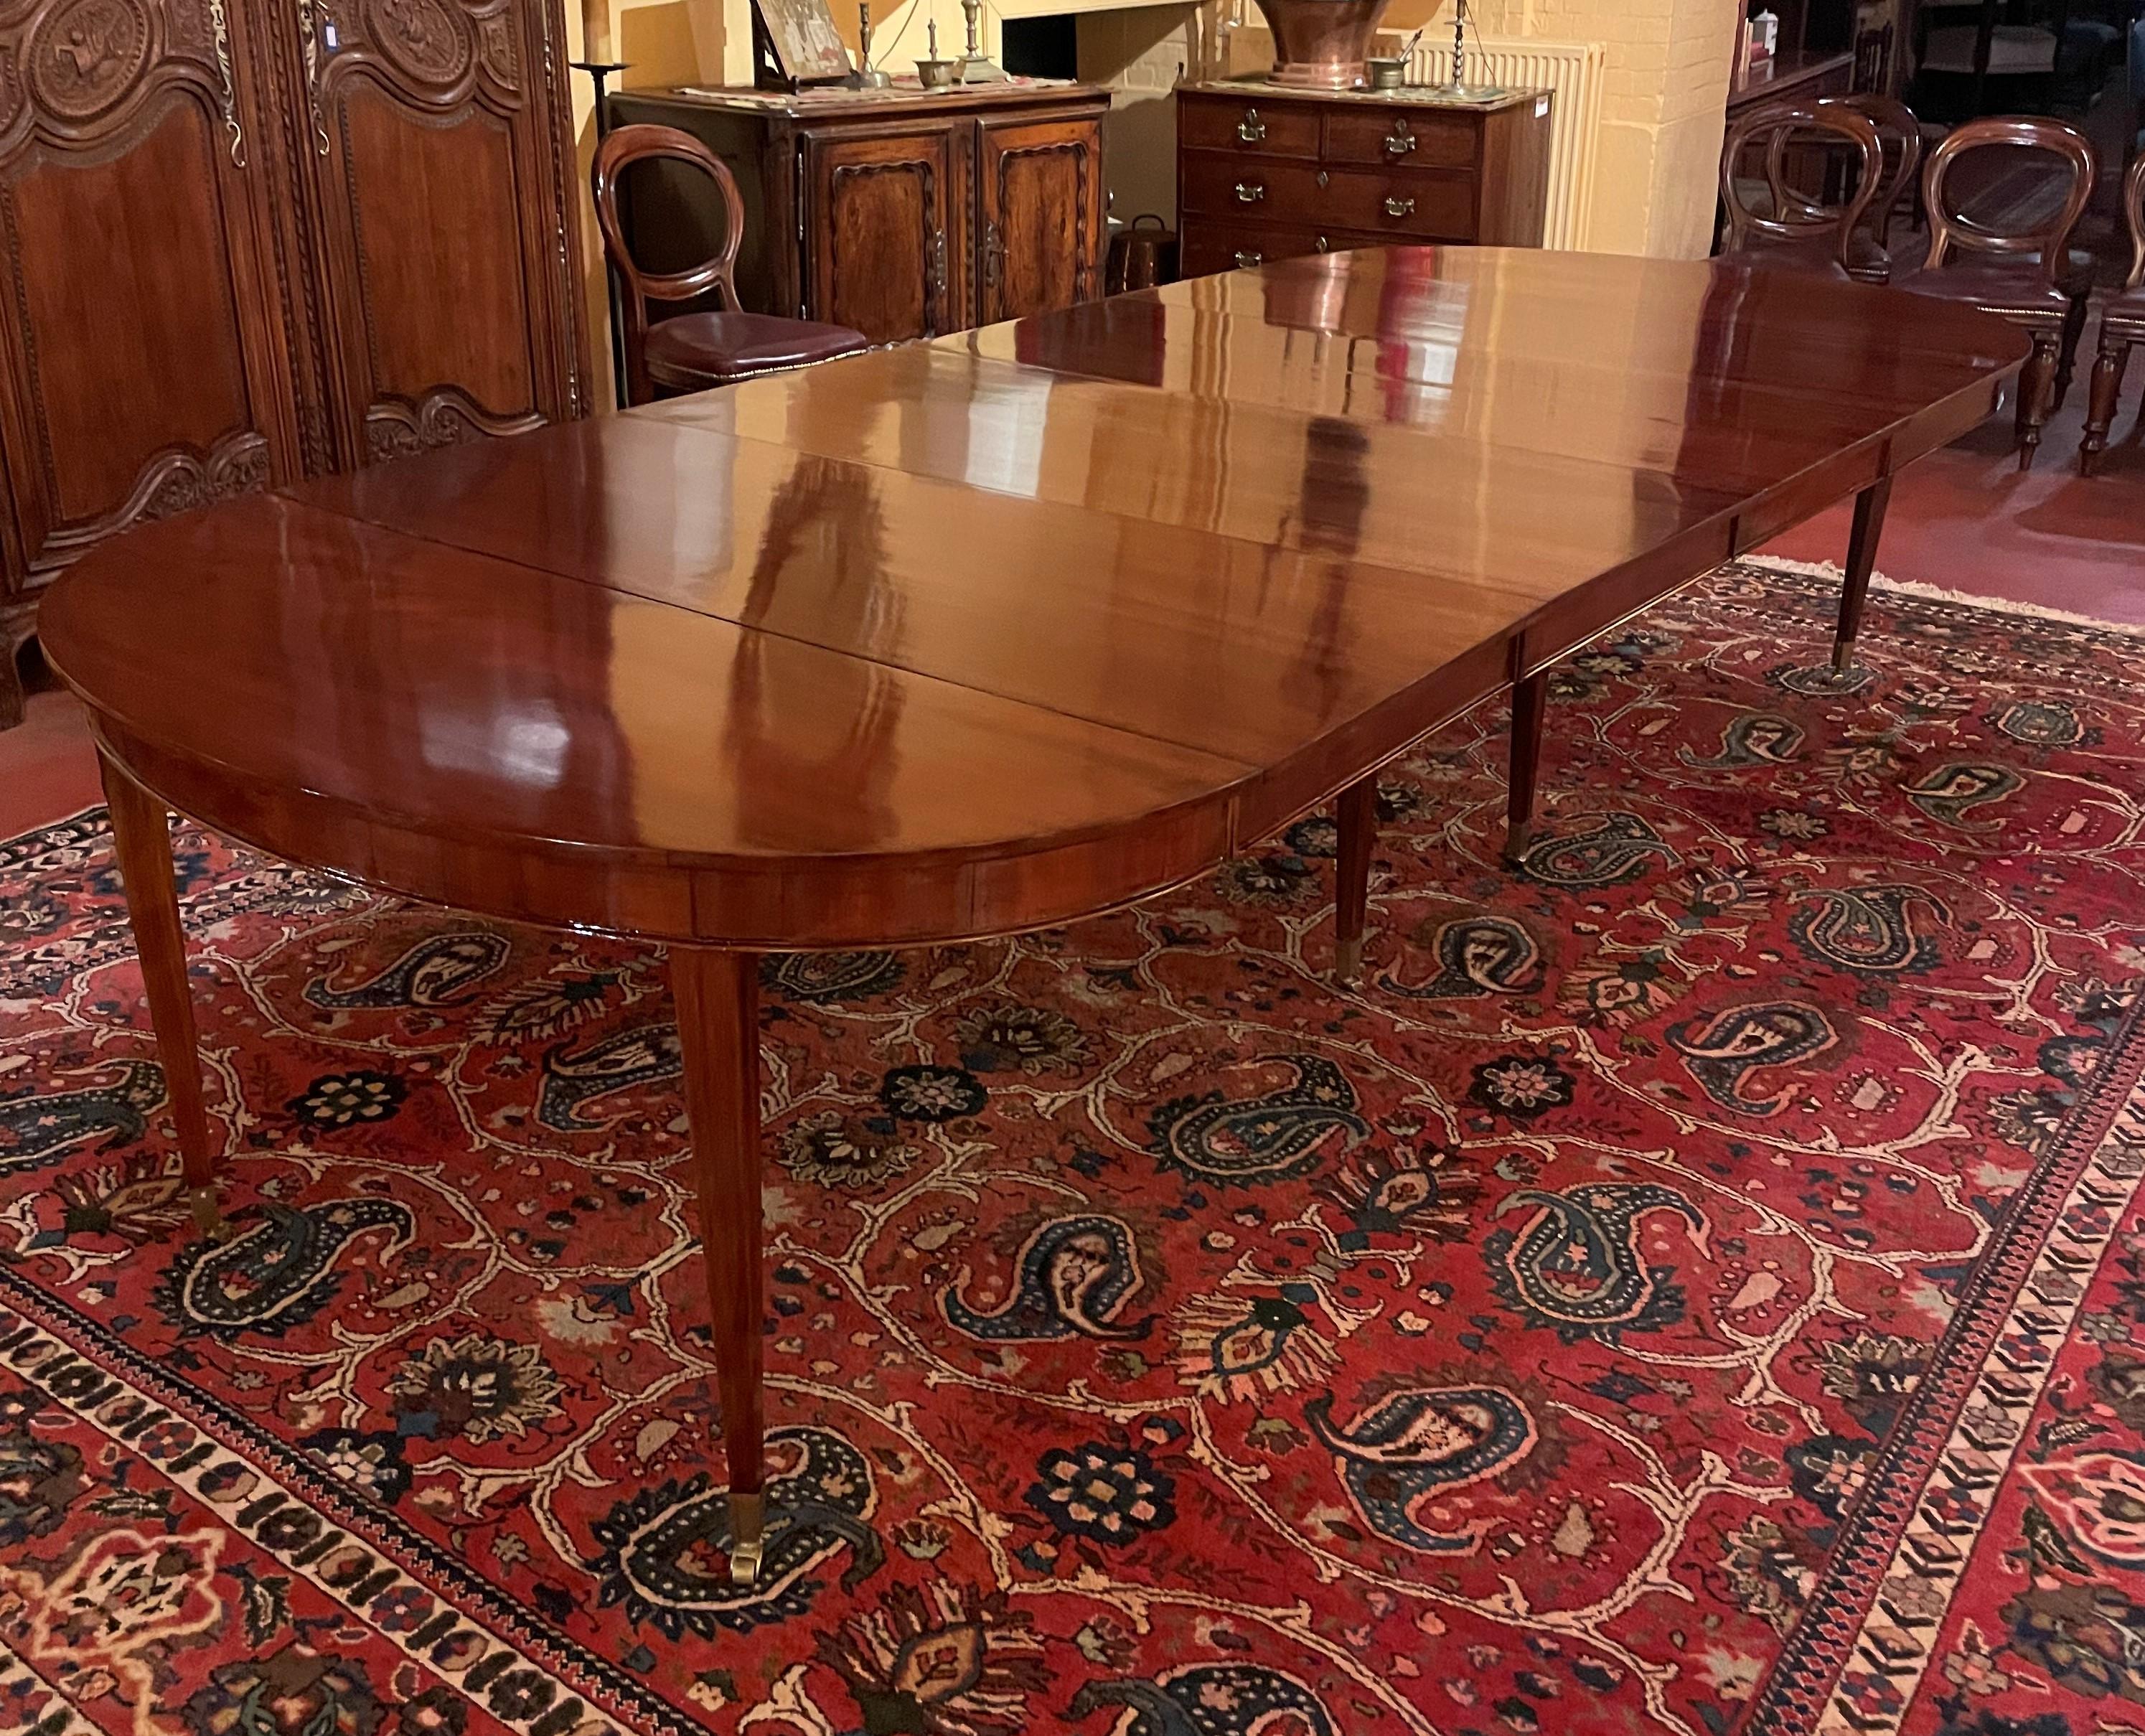 Large Louis XVI extending table with frieze from the end of the 18th century-beginning of the 19th century in solid mahogany

Very beautiful table which has eight Louis XVI legs ending with bronze castors The table as well as the 4 extensions are